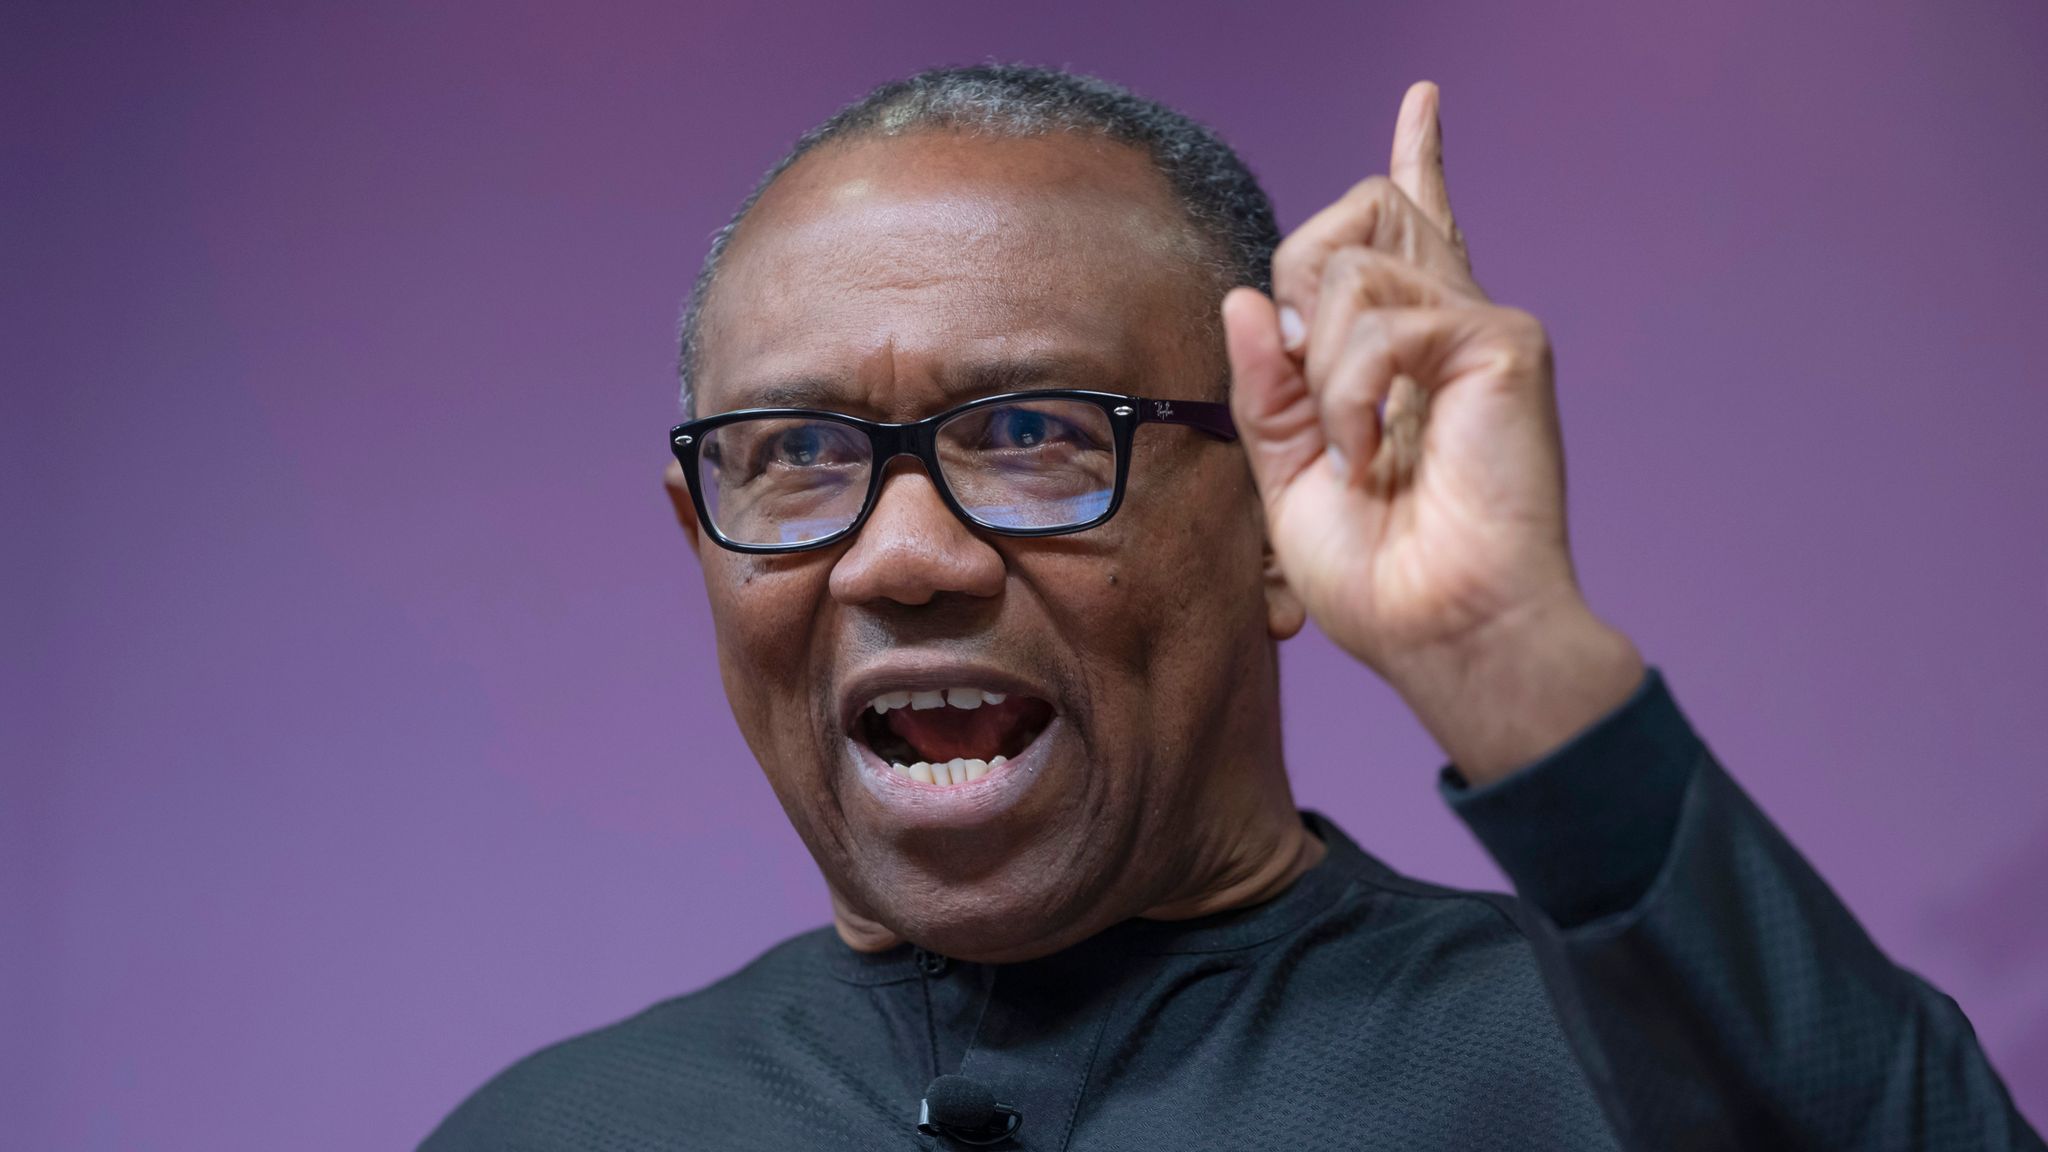 Gusau varsity kidnapping: Nigerians must not allow criminals make rules they’ll live by – Peter Obi